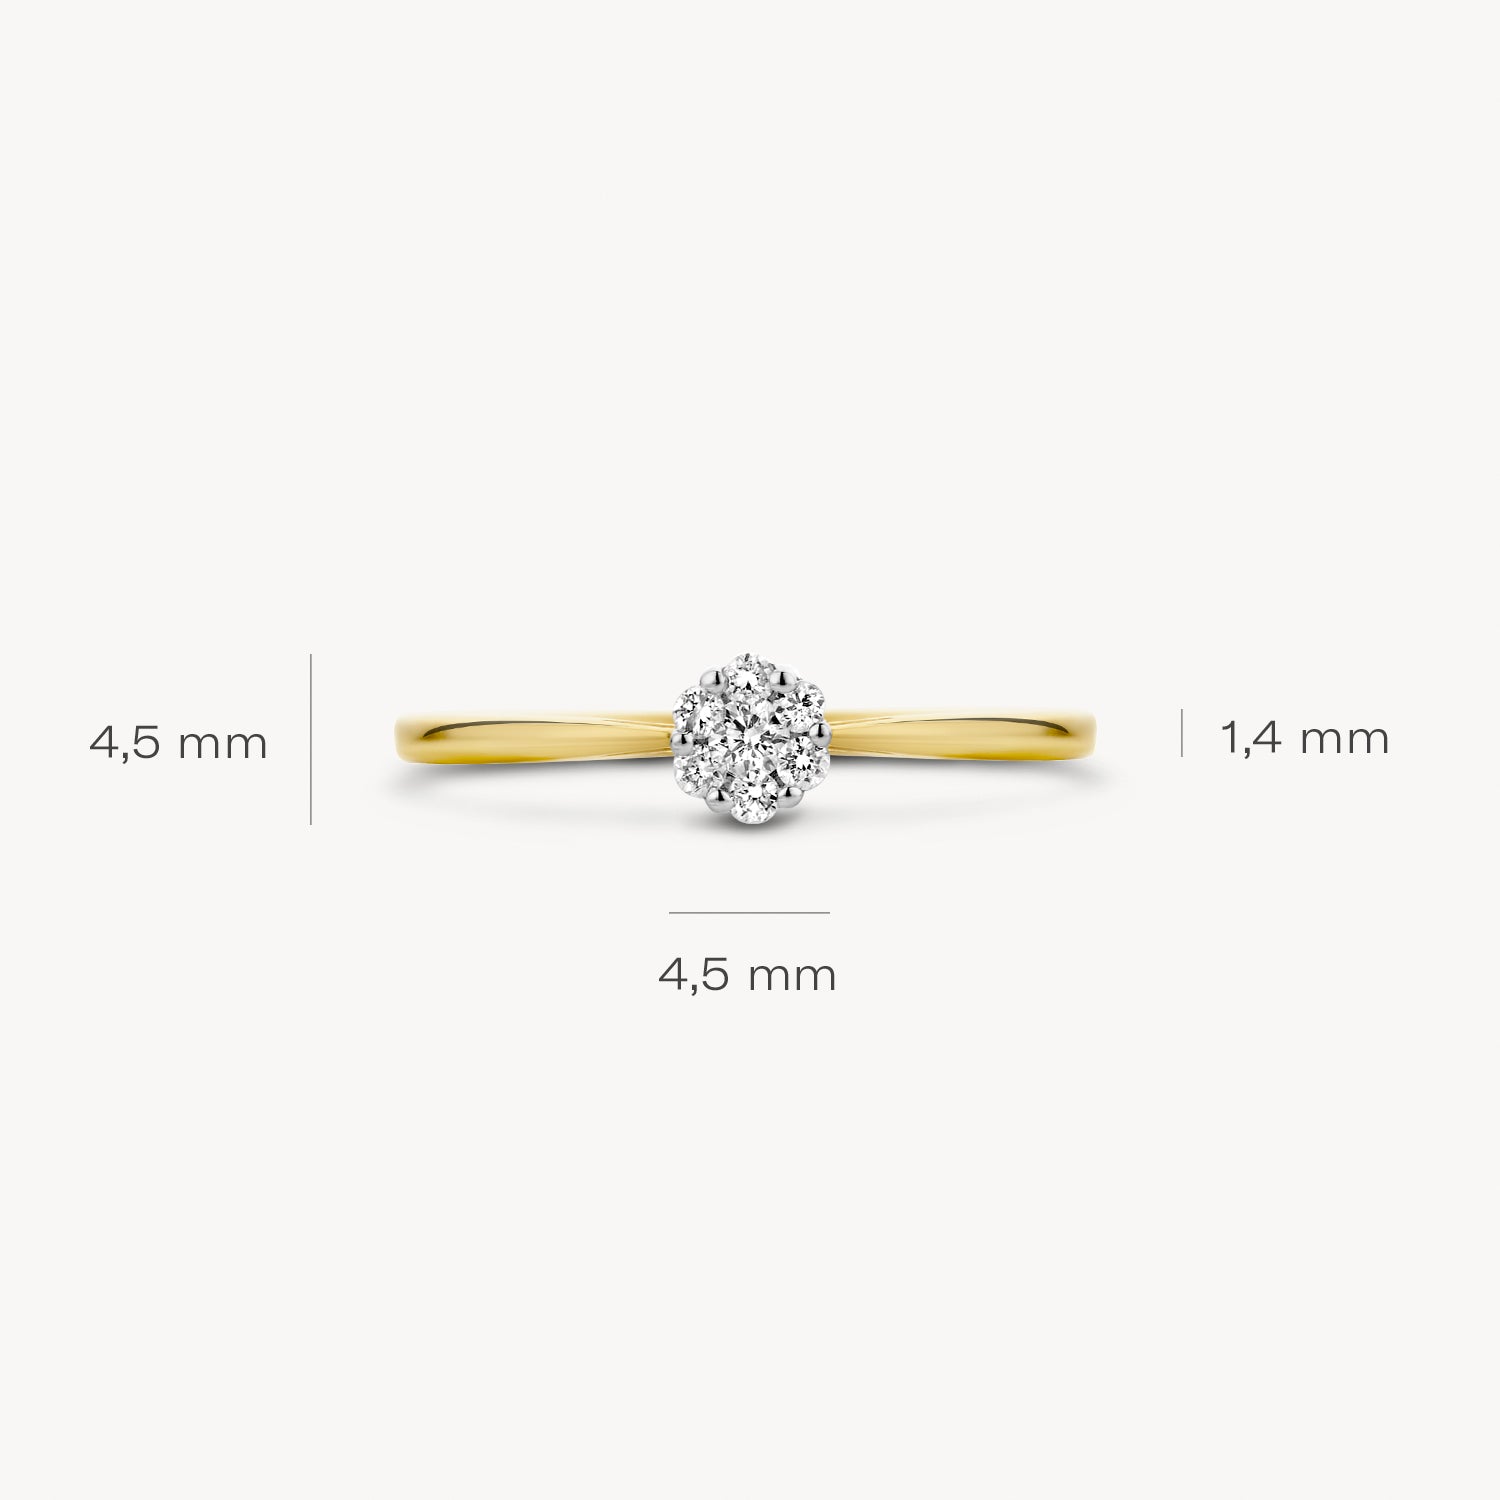 Ring 1610BDI - 14k Yellow and White Gold with Diamond